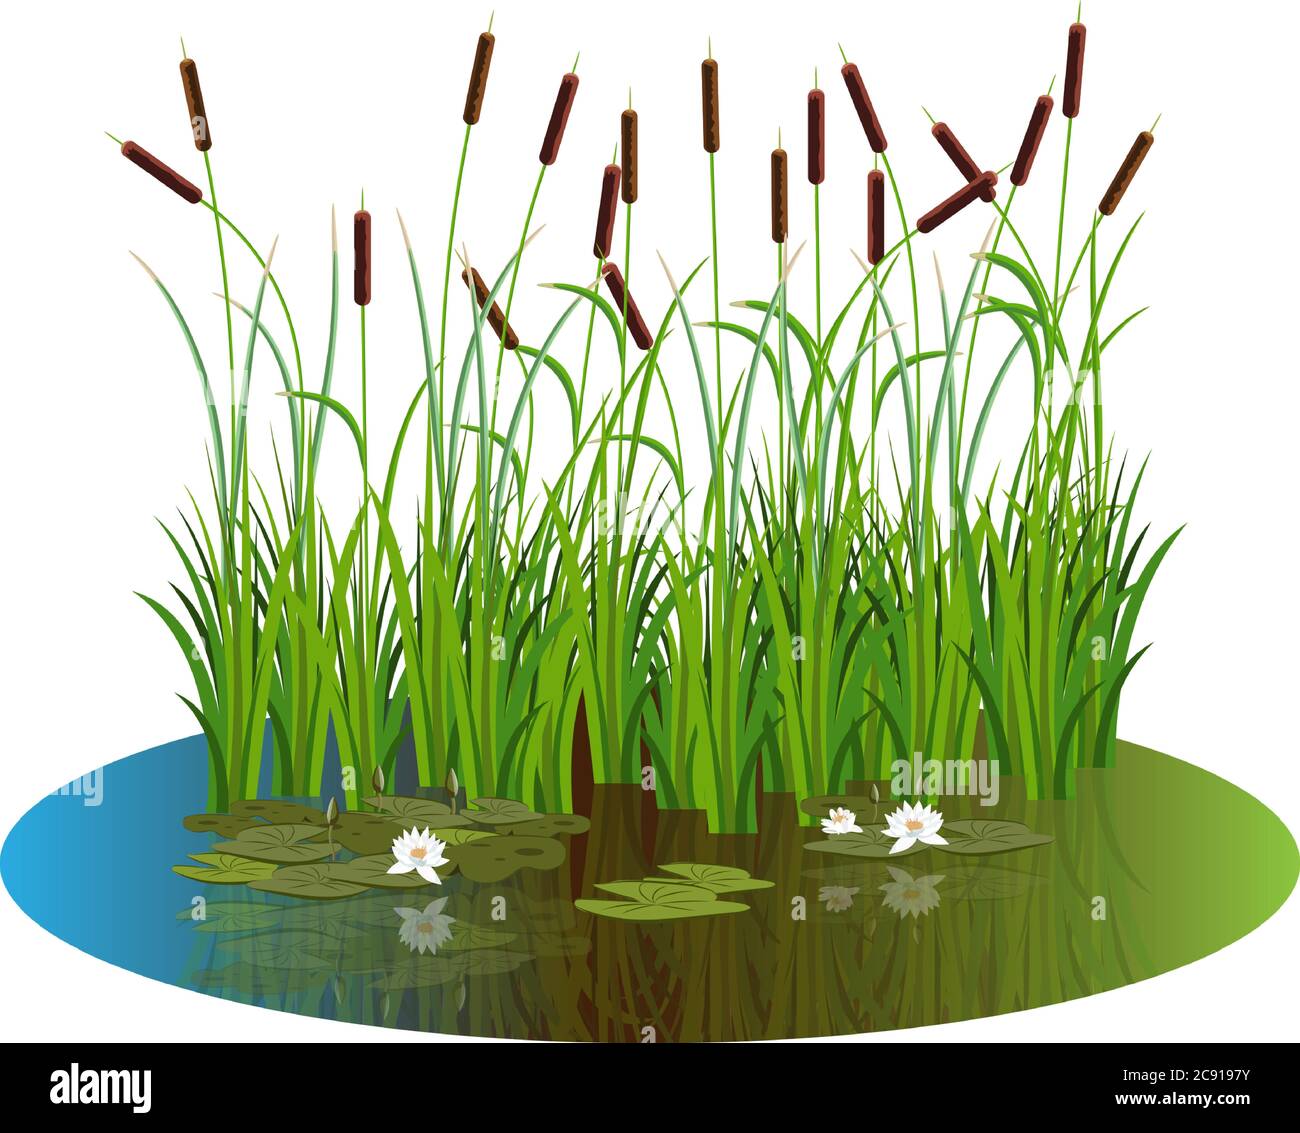 Bush reeds with water lily flowers and leaves on the pond water. Reeds stern and white water lily reflected in the pond lake water.. Art illustration Stock Vector